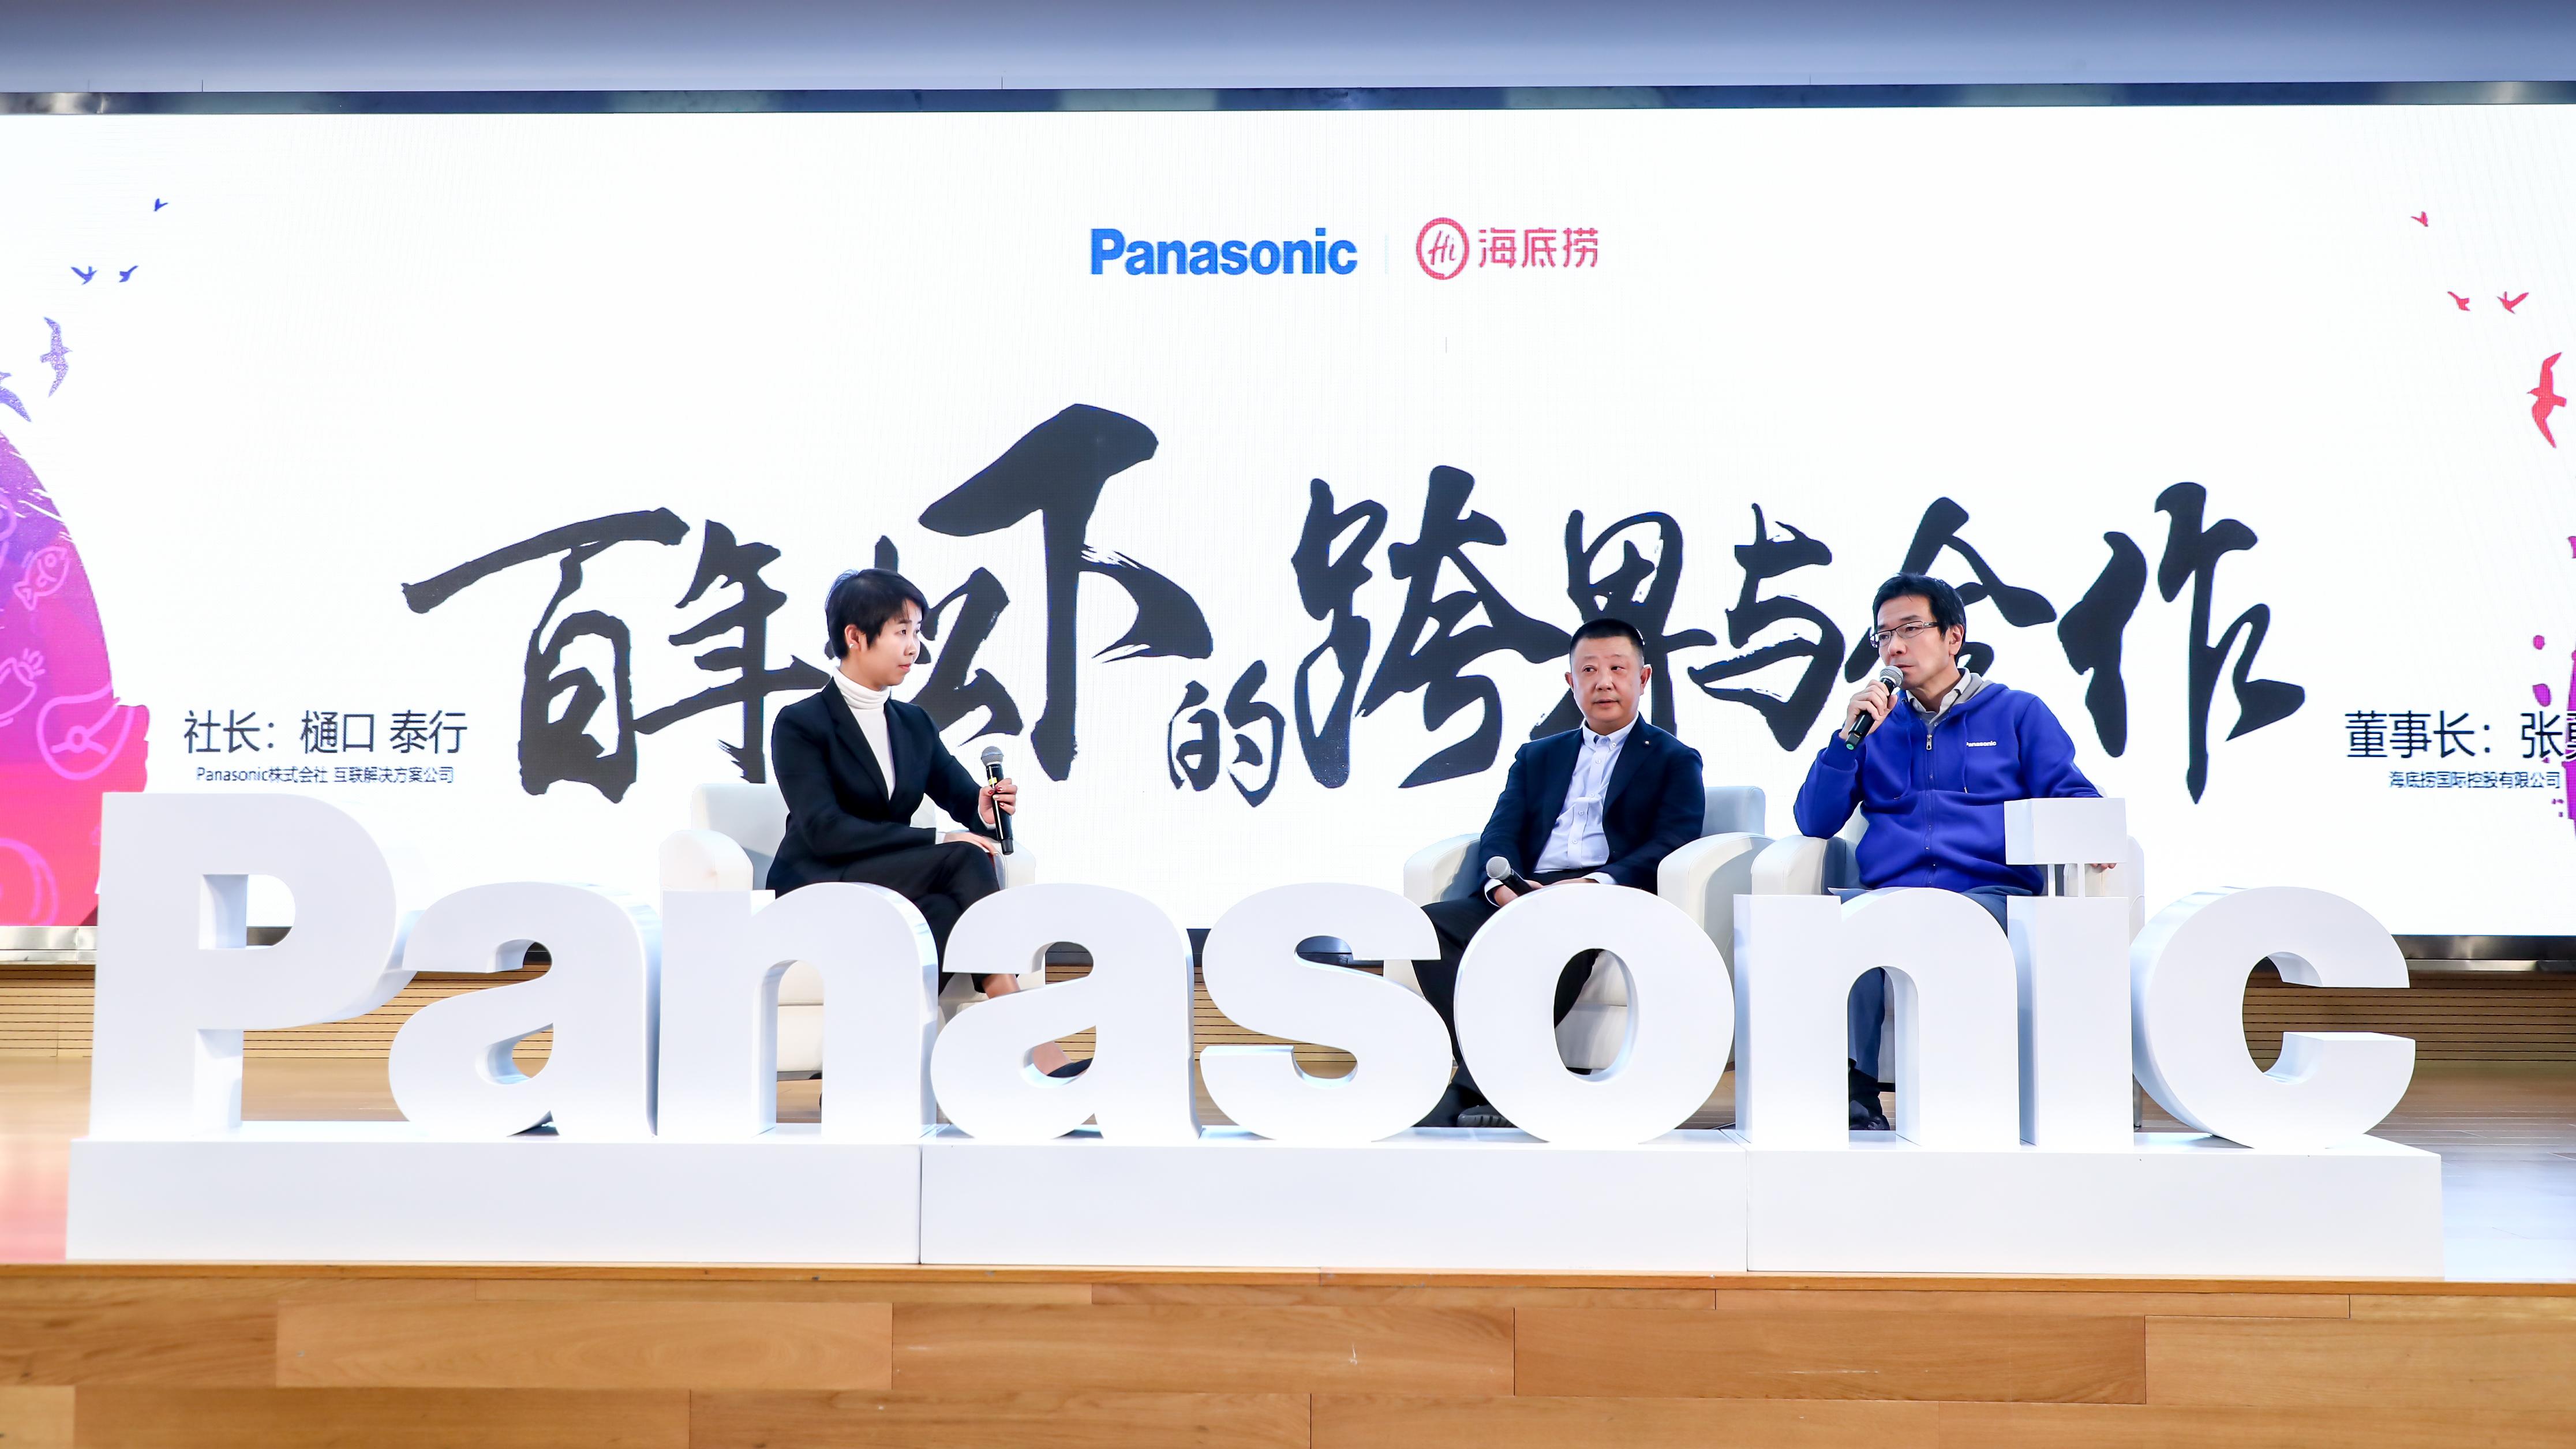 photo: Dr. Zhai Xin, Associate Professor of the Department of Management Science and Information Systems at the Guanghua School of Management, Peking University, Chairman of Haidilao, Zhang Yong, Senior Managing Executive Officer of Panasonic Corporation, Yasuyuki Higuchi